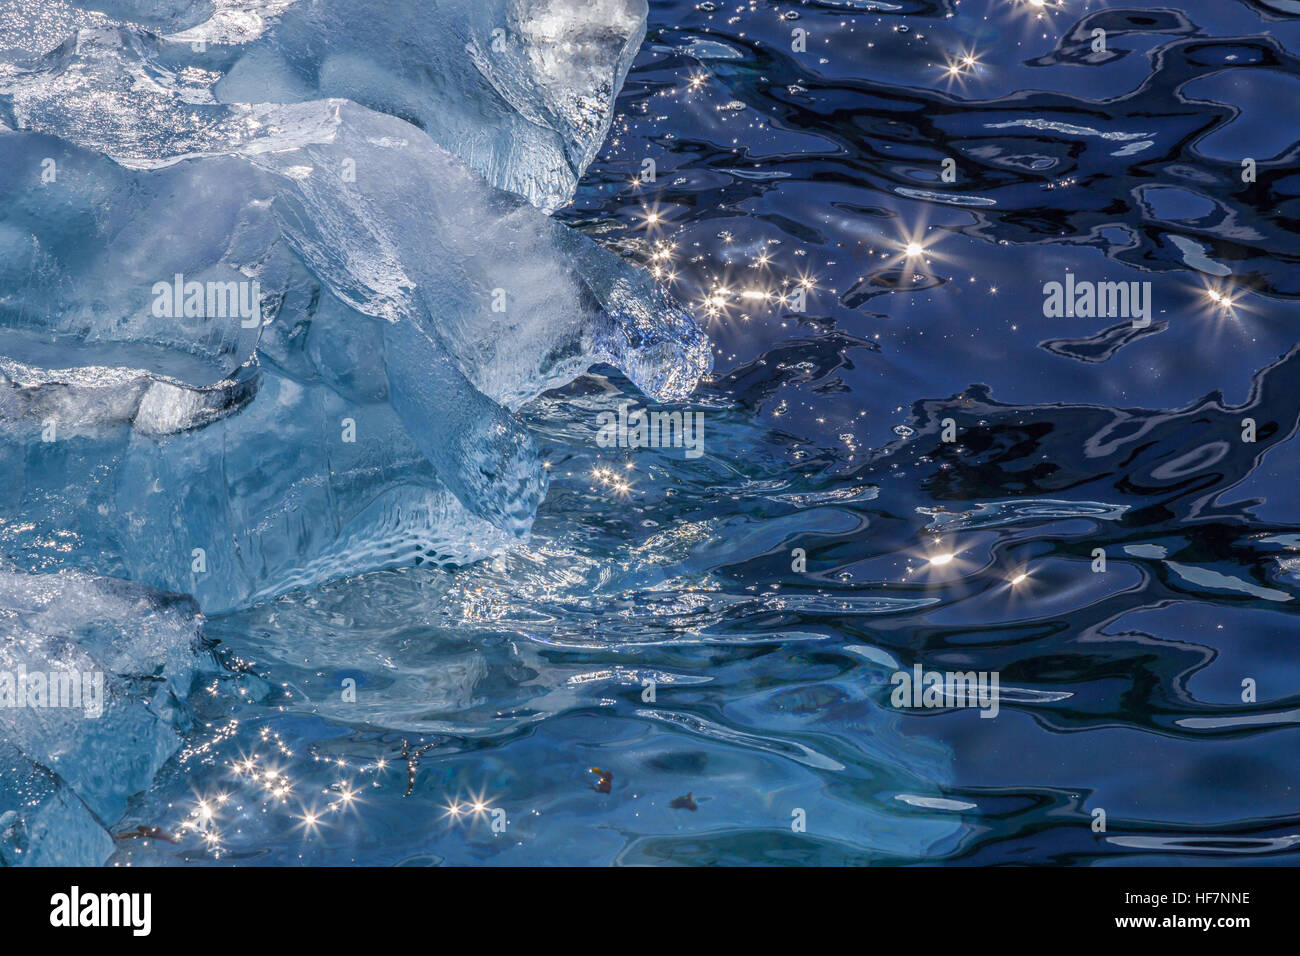 Pieces of Iceberg drifting at the shore and sun beams shining on the water surface, Greenland Stock Photo